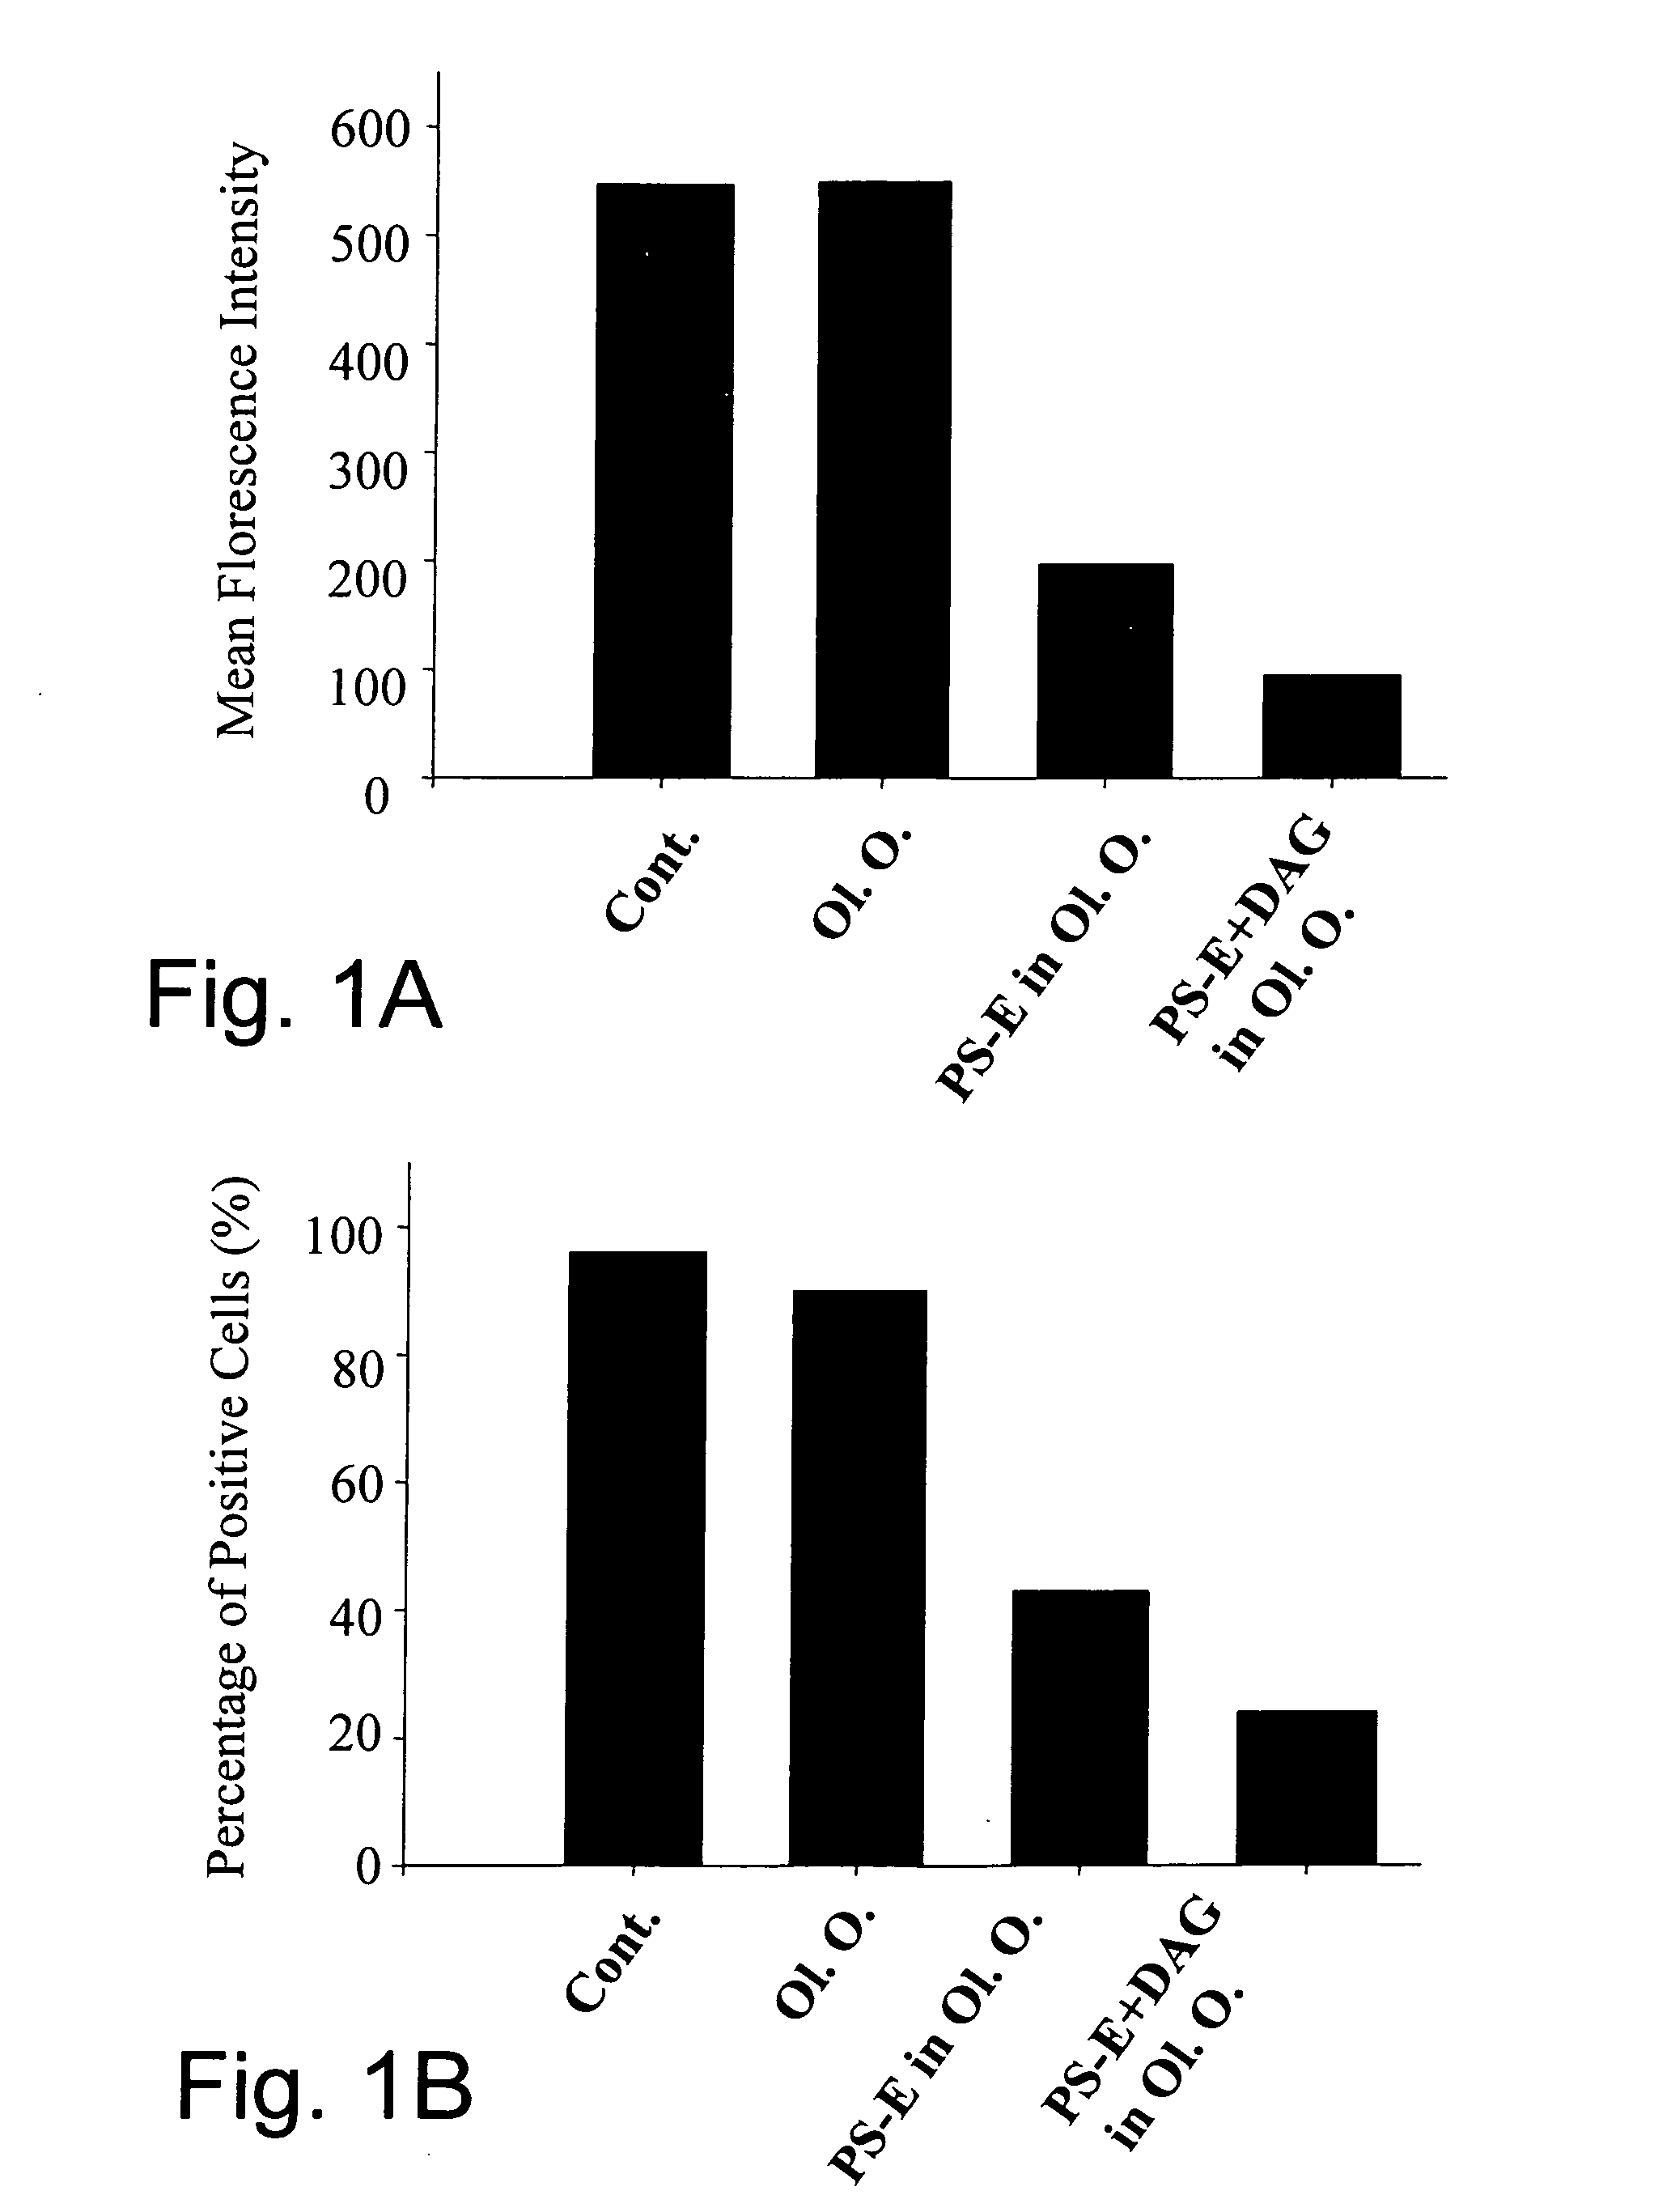 Oils enriched with diacylglycerols and phytosterol esters and unit dosage forms thereof for use in therapy